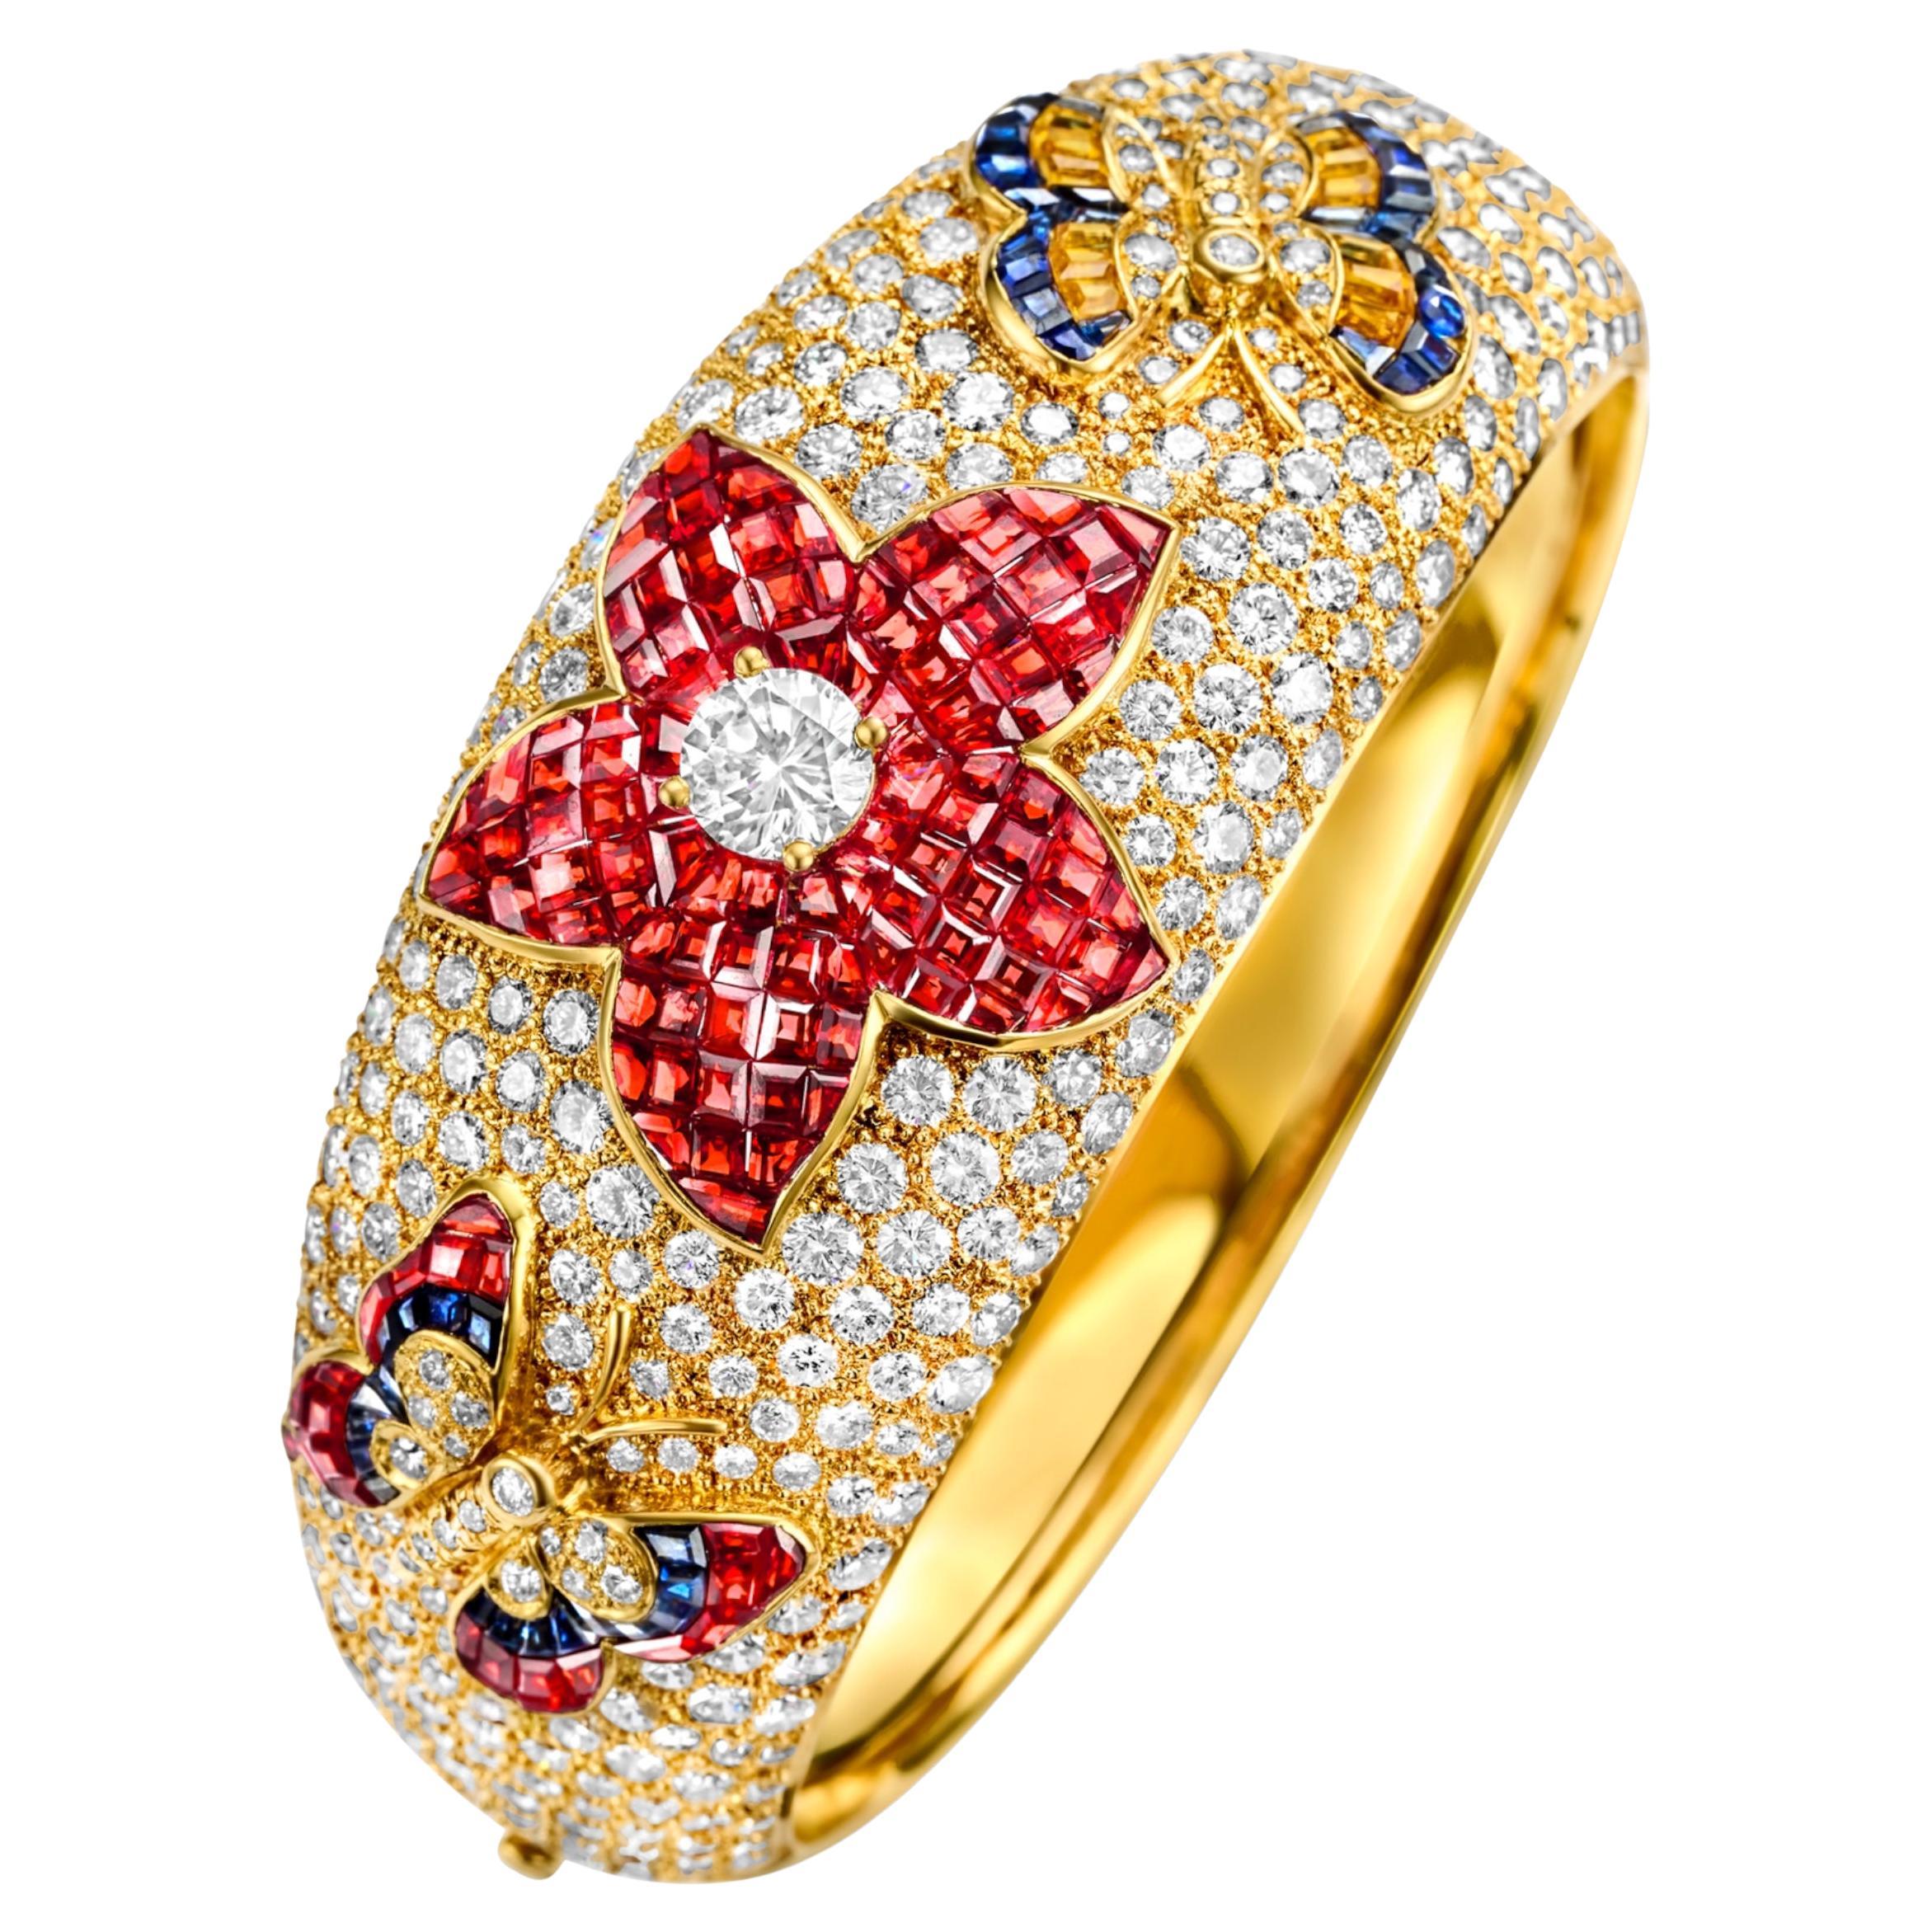 18 kt. Yellow Gold Wide Bangle Bracelet With Diamonds, Rubies, Sapphires For Sale